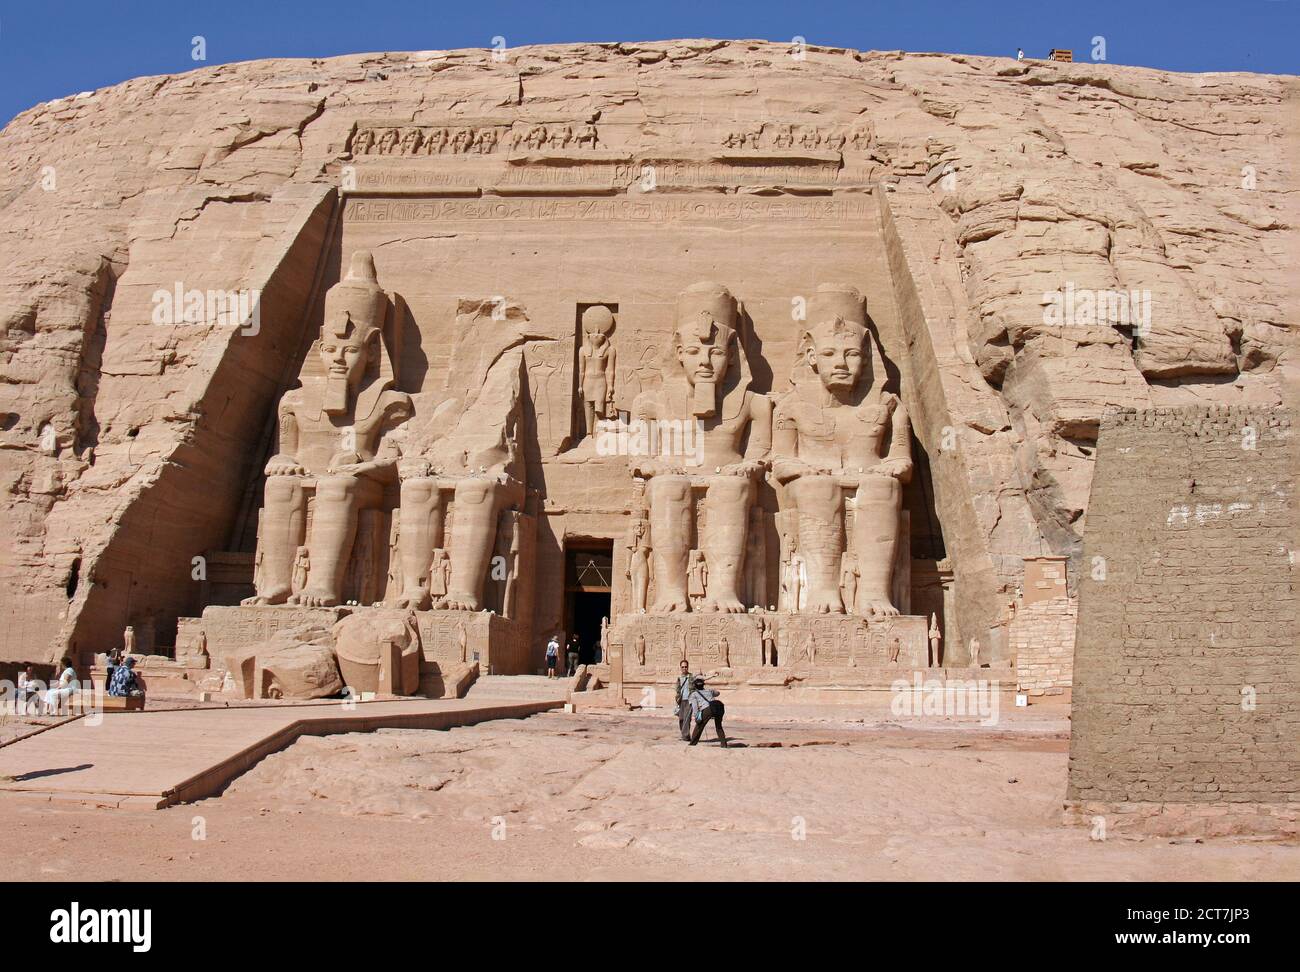 Abu Simbel in Egypt is a popular place for tourists to visit.  Egypt, 2008 Stock Photo